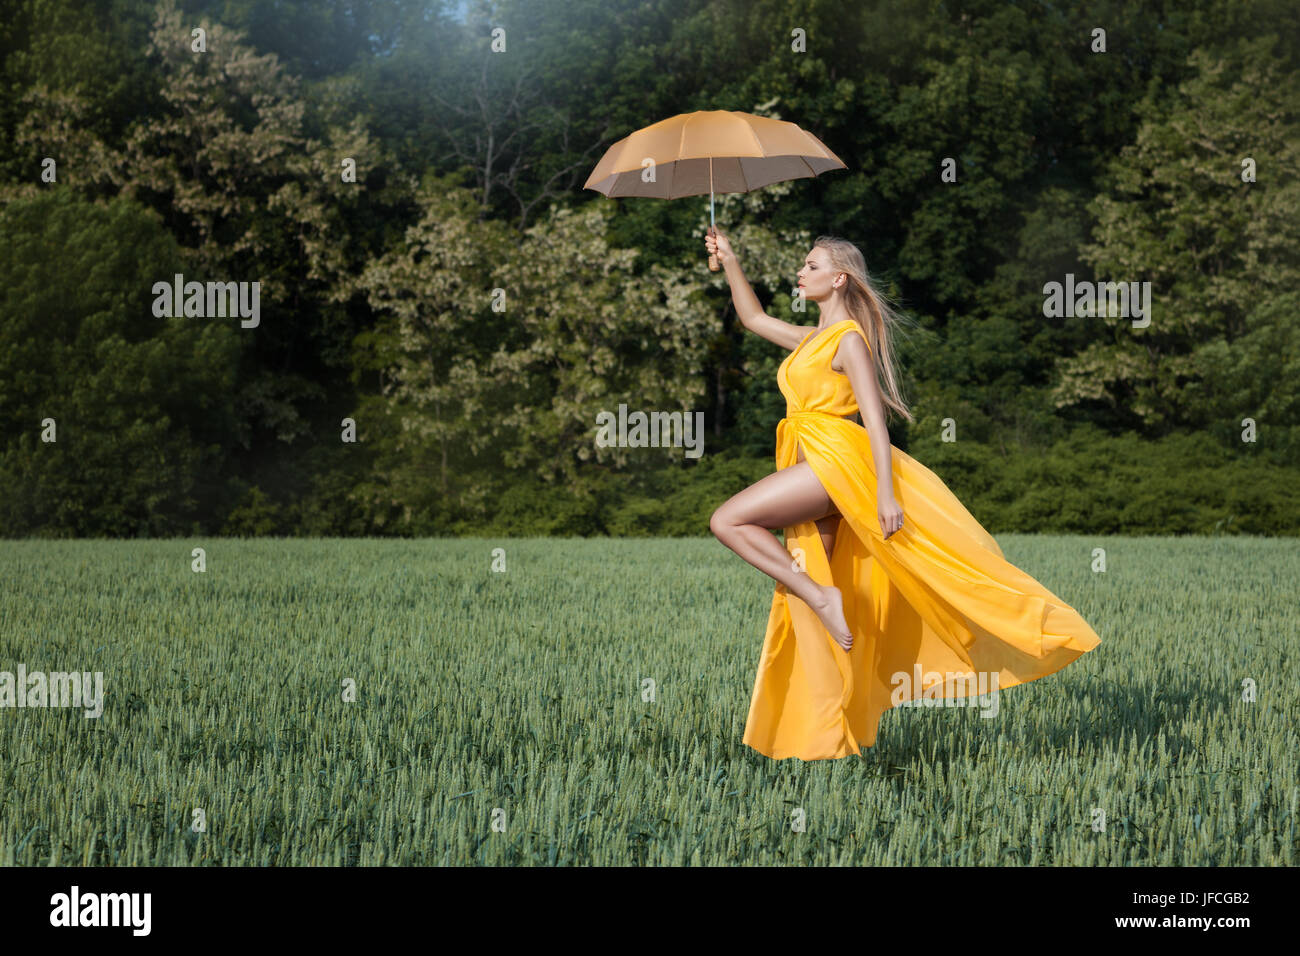 Girl flies over the field. In her hands she holds an umbrella. Stock Photo